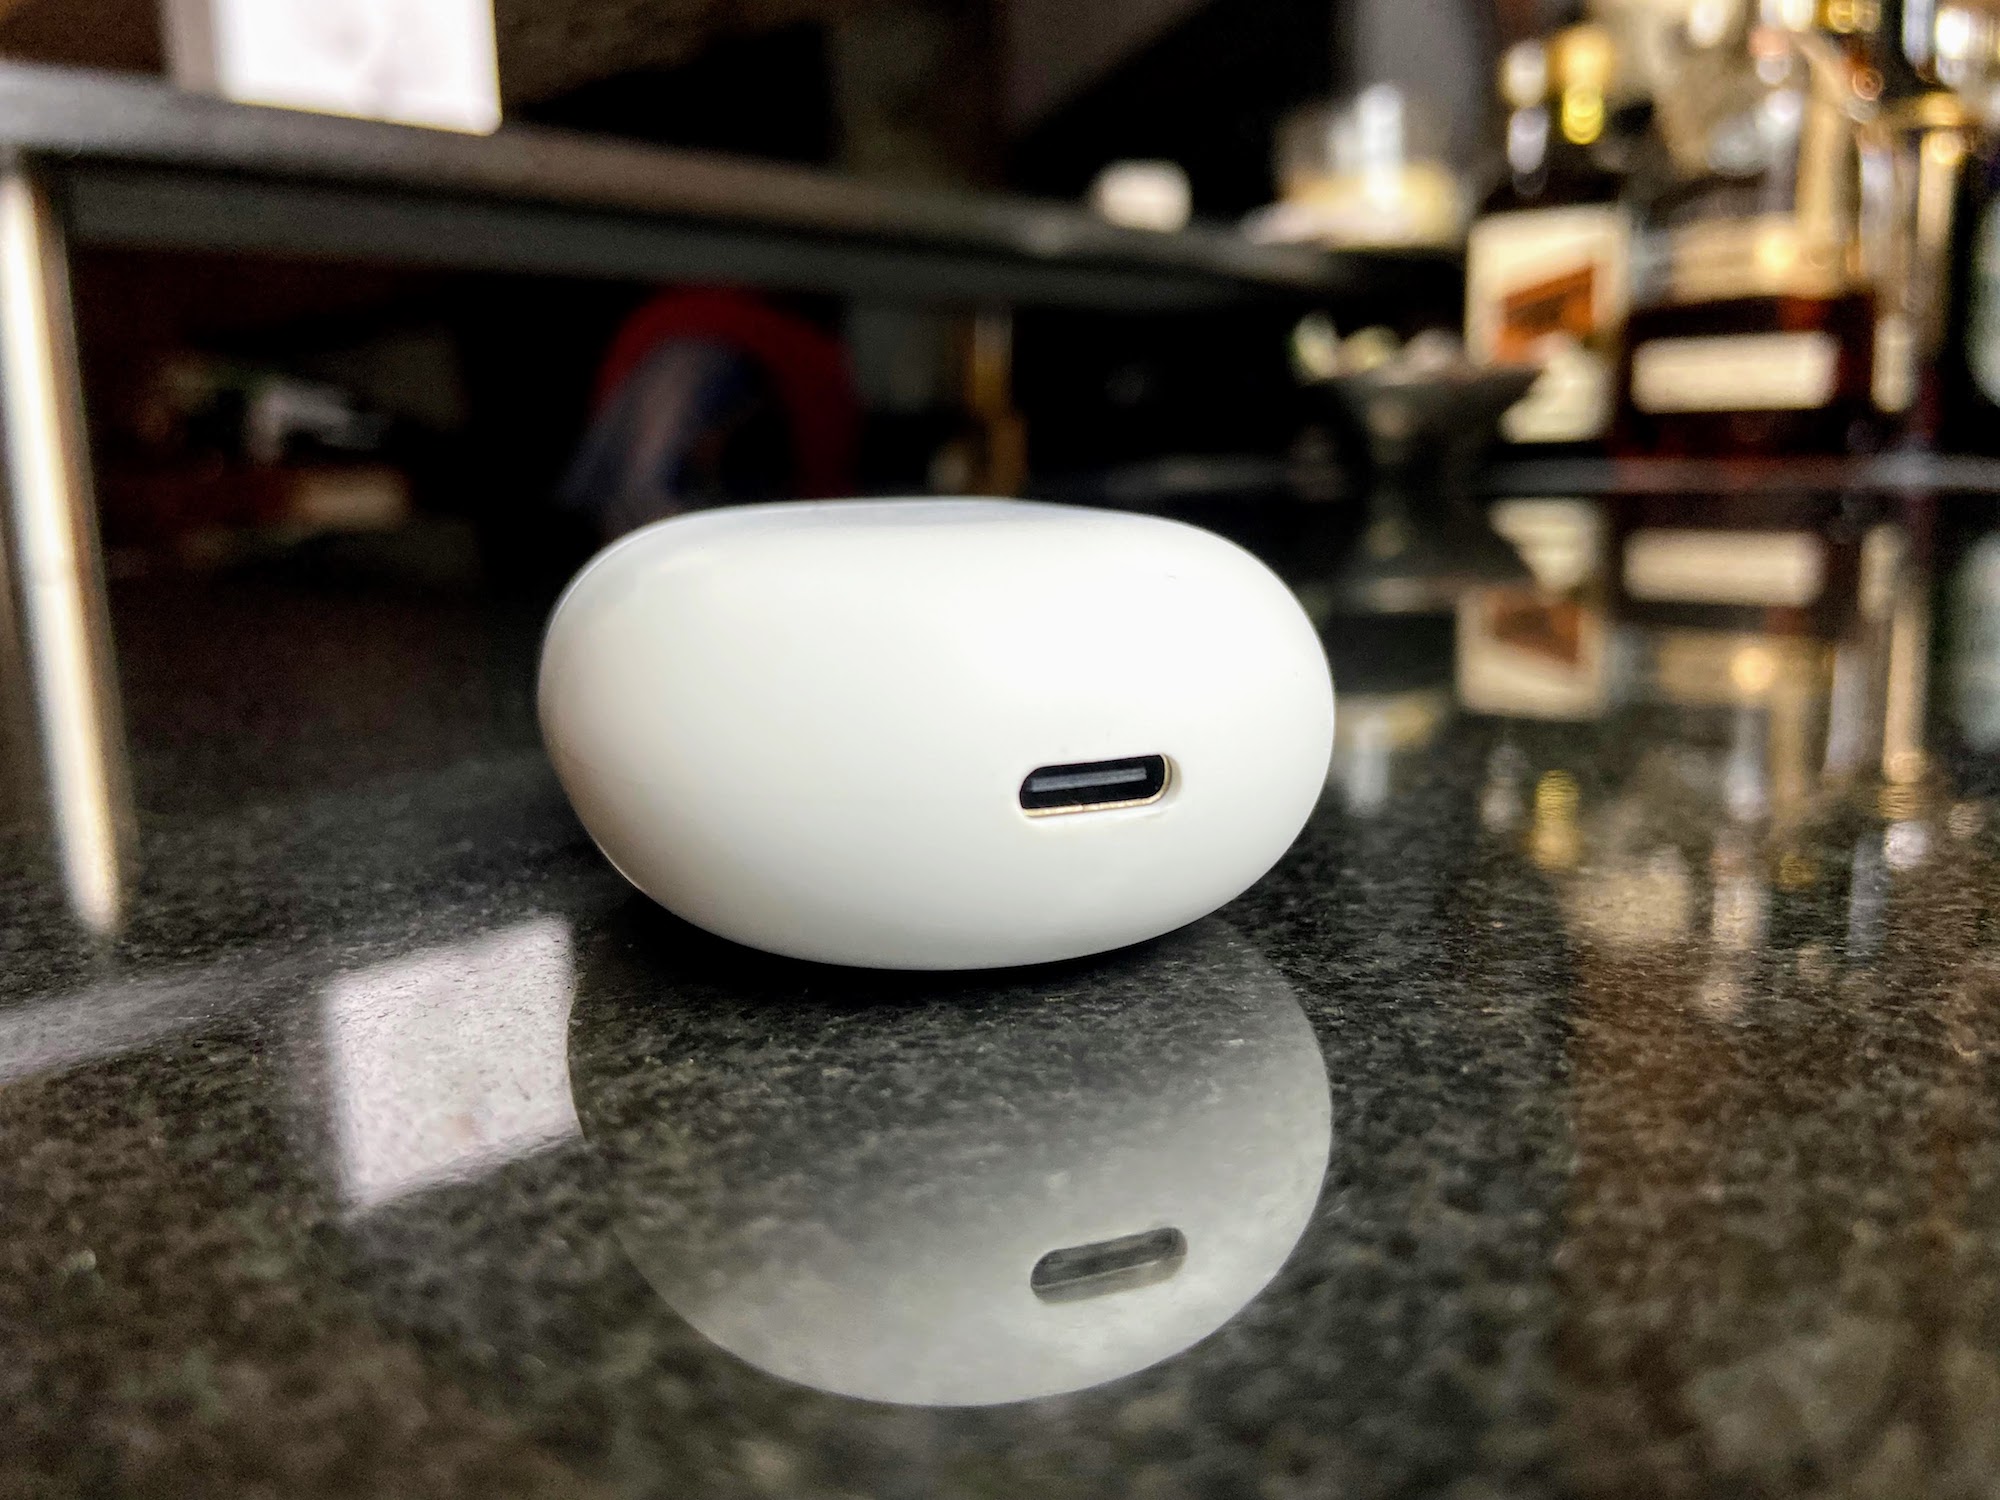 Pixel Buds A-Series Hands-On Review: Same Buds, Better Price